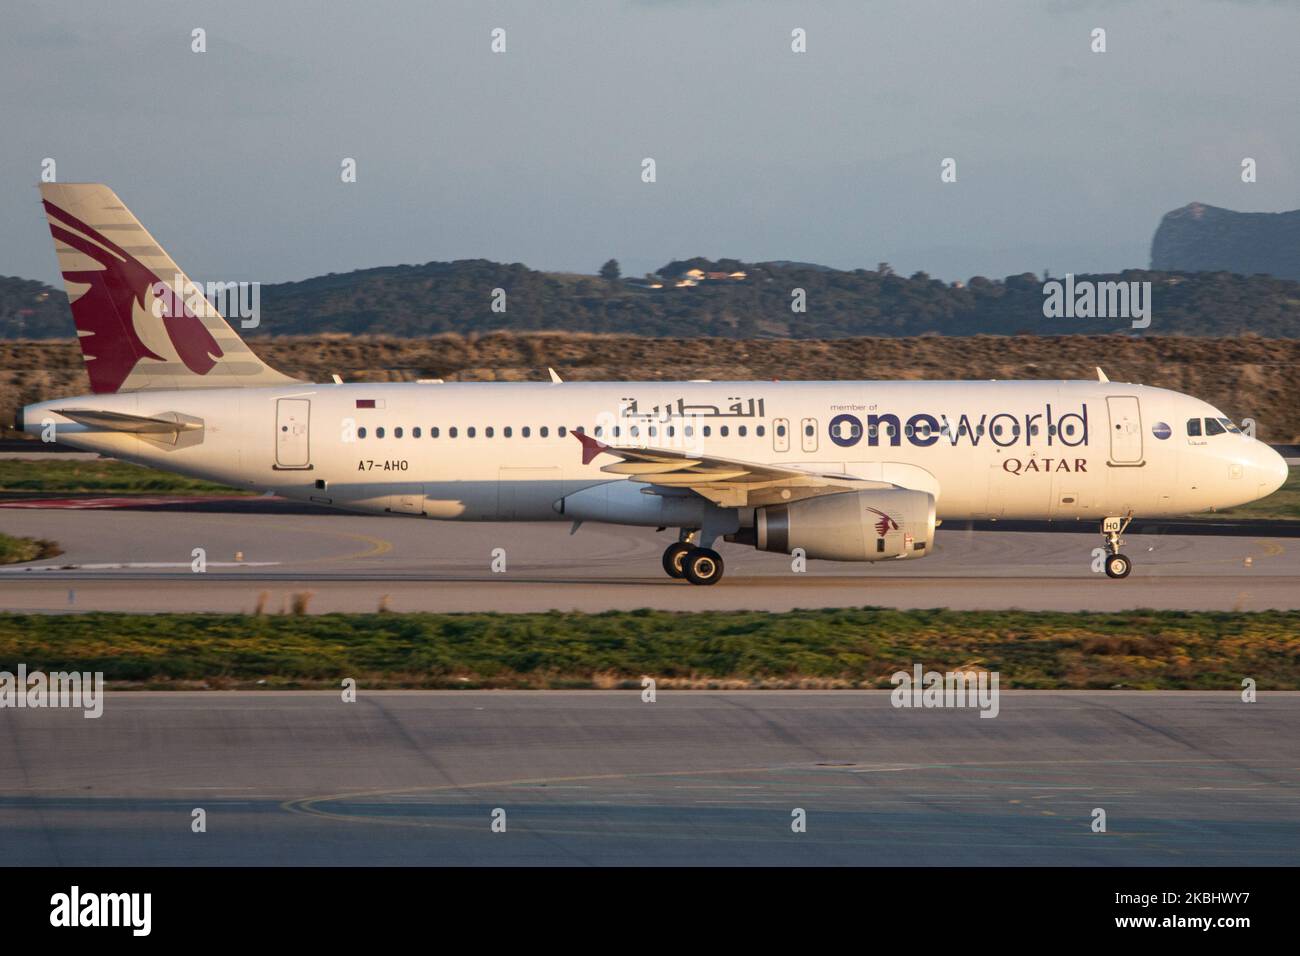 Qatar Airways Airbus A320 aircraft as seen landing and taxiing at Athens International Airport Eleftherios Venizelos ATH LGAV in Greece during the magic hour after the sunset. The airplane is an Airbus A320-200 with registration A7-AHO, 2x IAE jet engines and is painted with a special livery scheme ONEWORLD, the aviation alliance Qatar belongs. The state owned flag carrier airline QTR QR Qatari connects the Greek capital to Doha Hamad International Airport on a daily basis. February 16, 2020 (Photo by Nicolas Economou/NurPhoto) Stock Photo